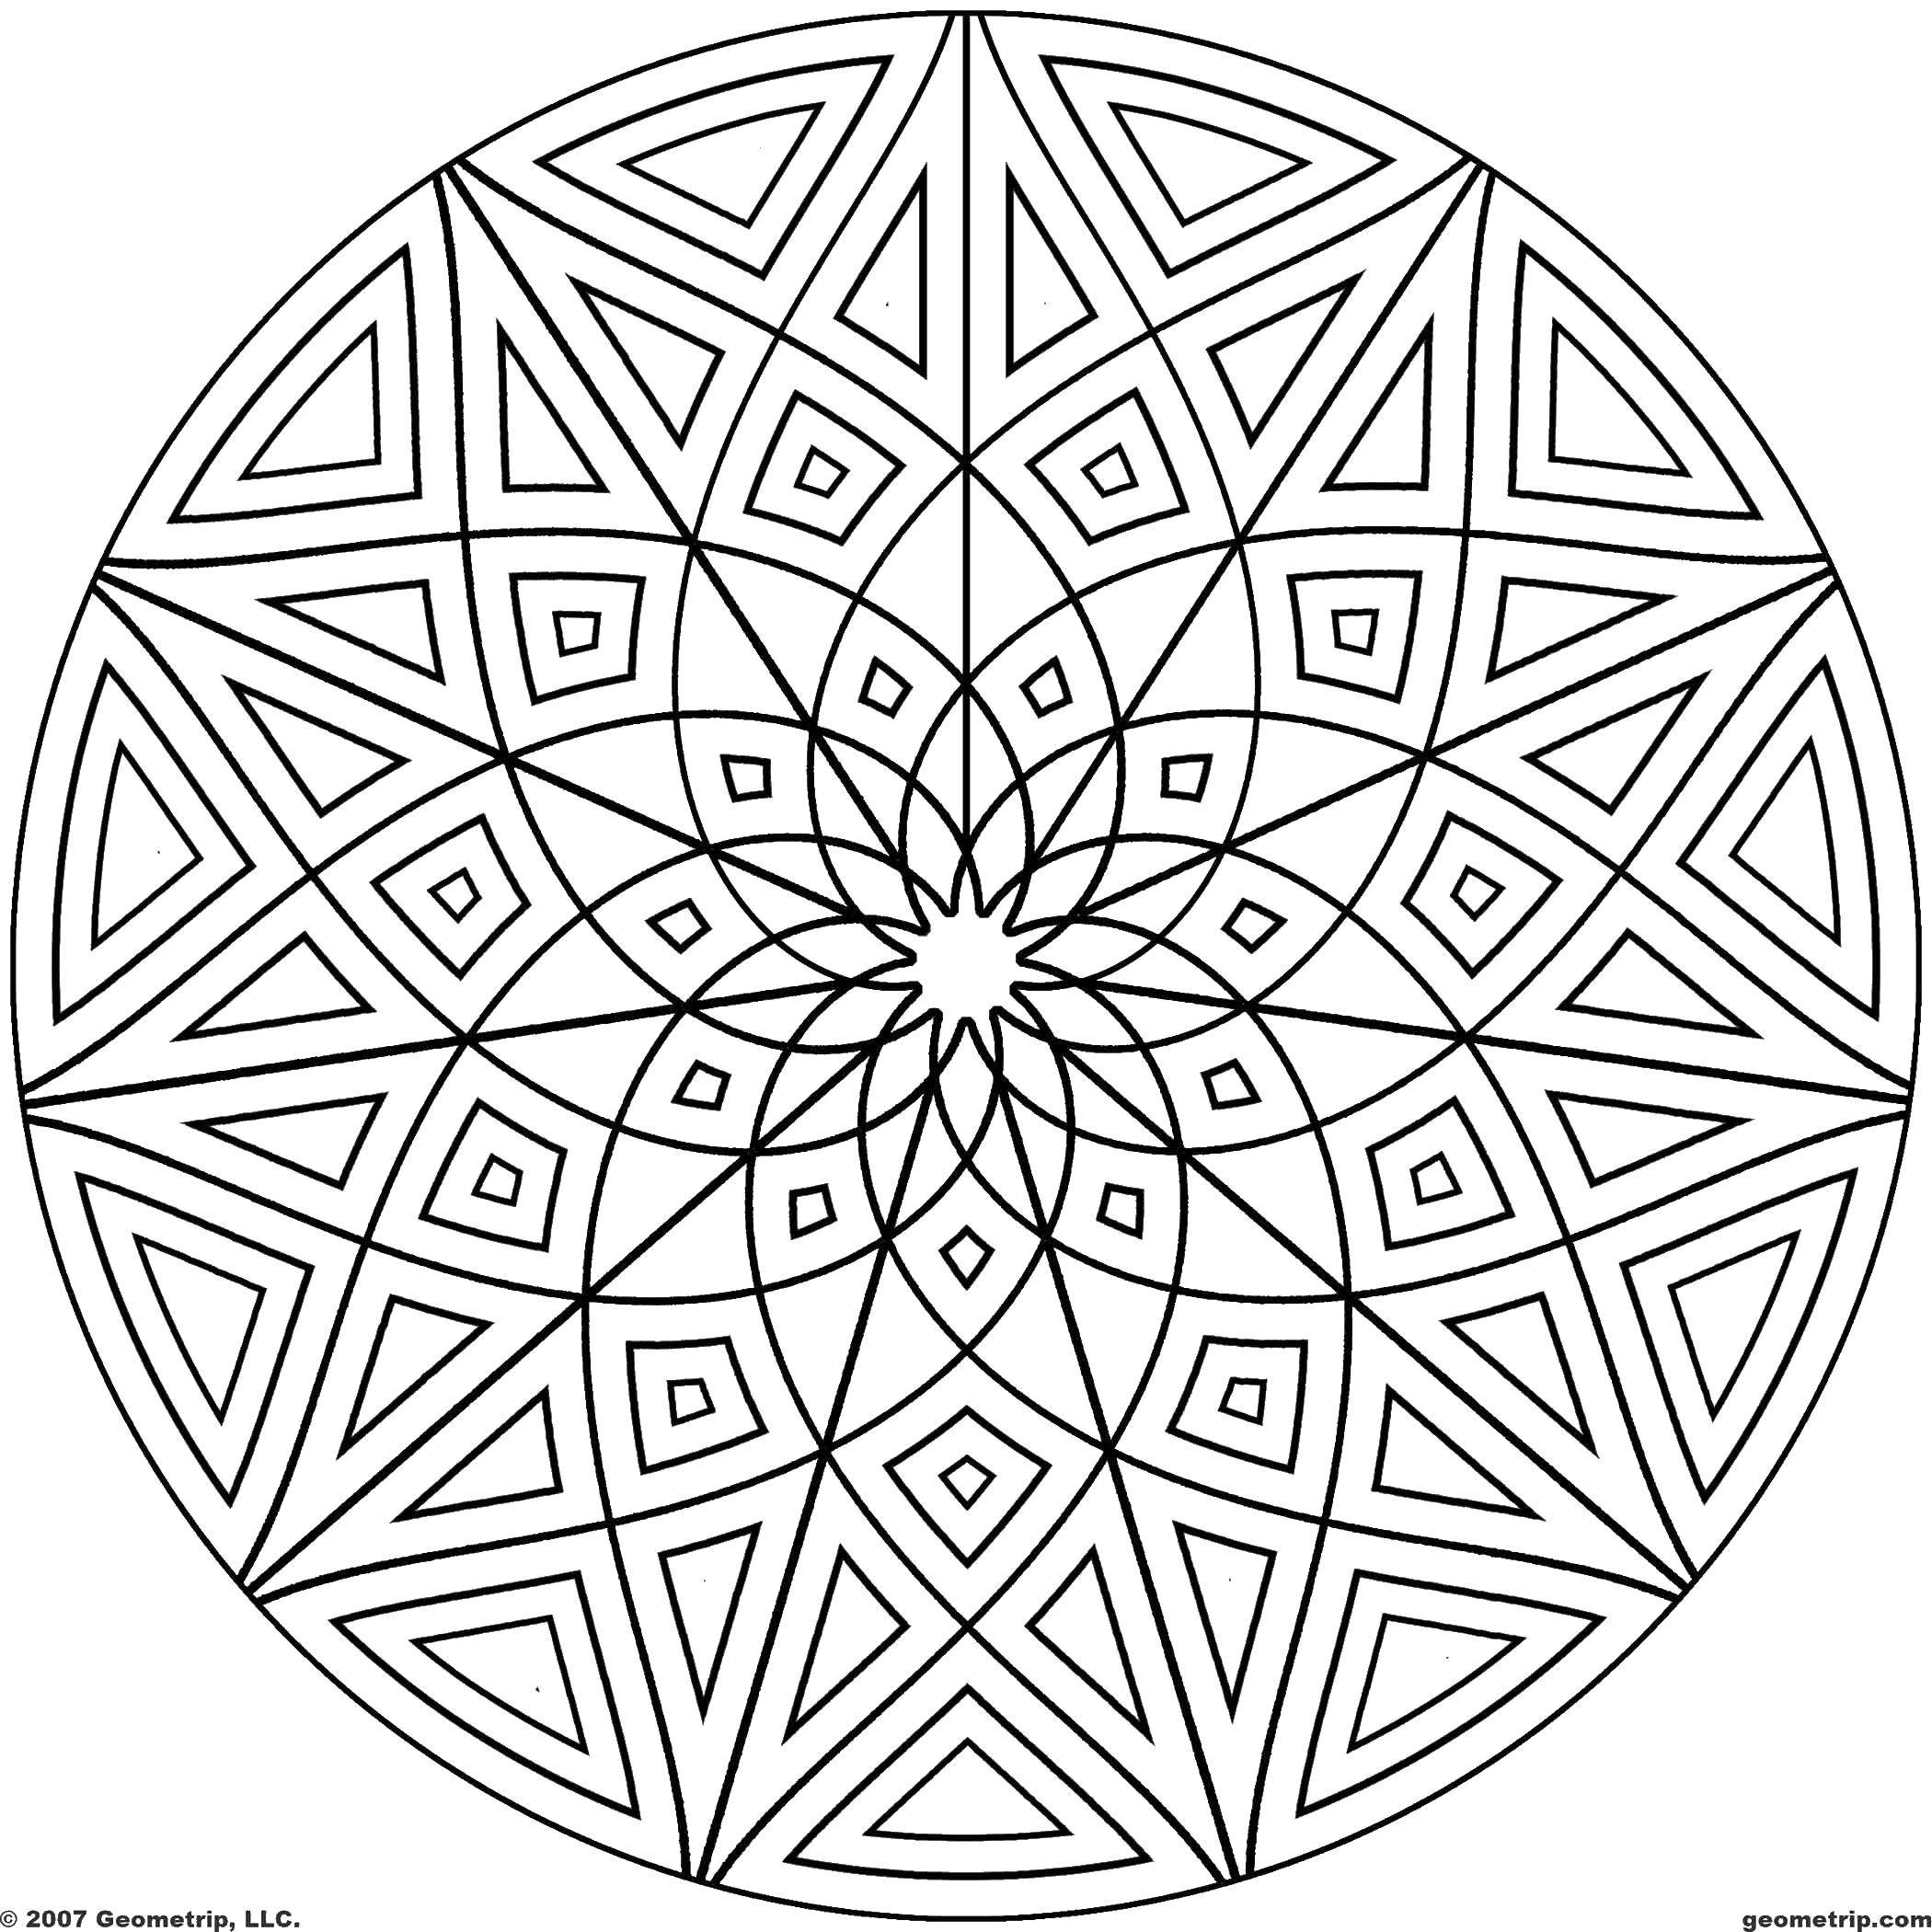 Coloring Intricate design patterns. Category Patterns. Tags:  patterns, shapes, flower.